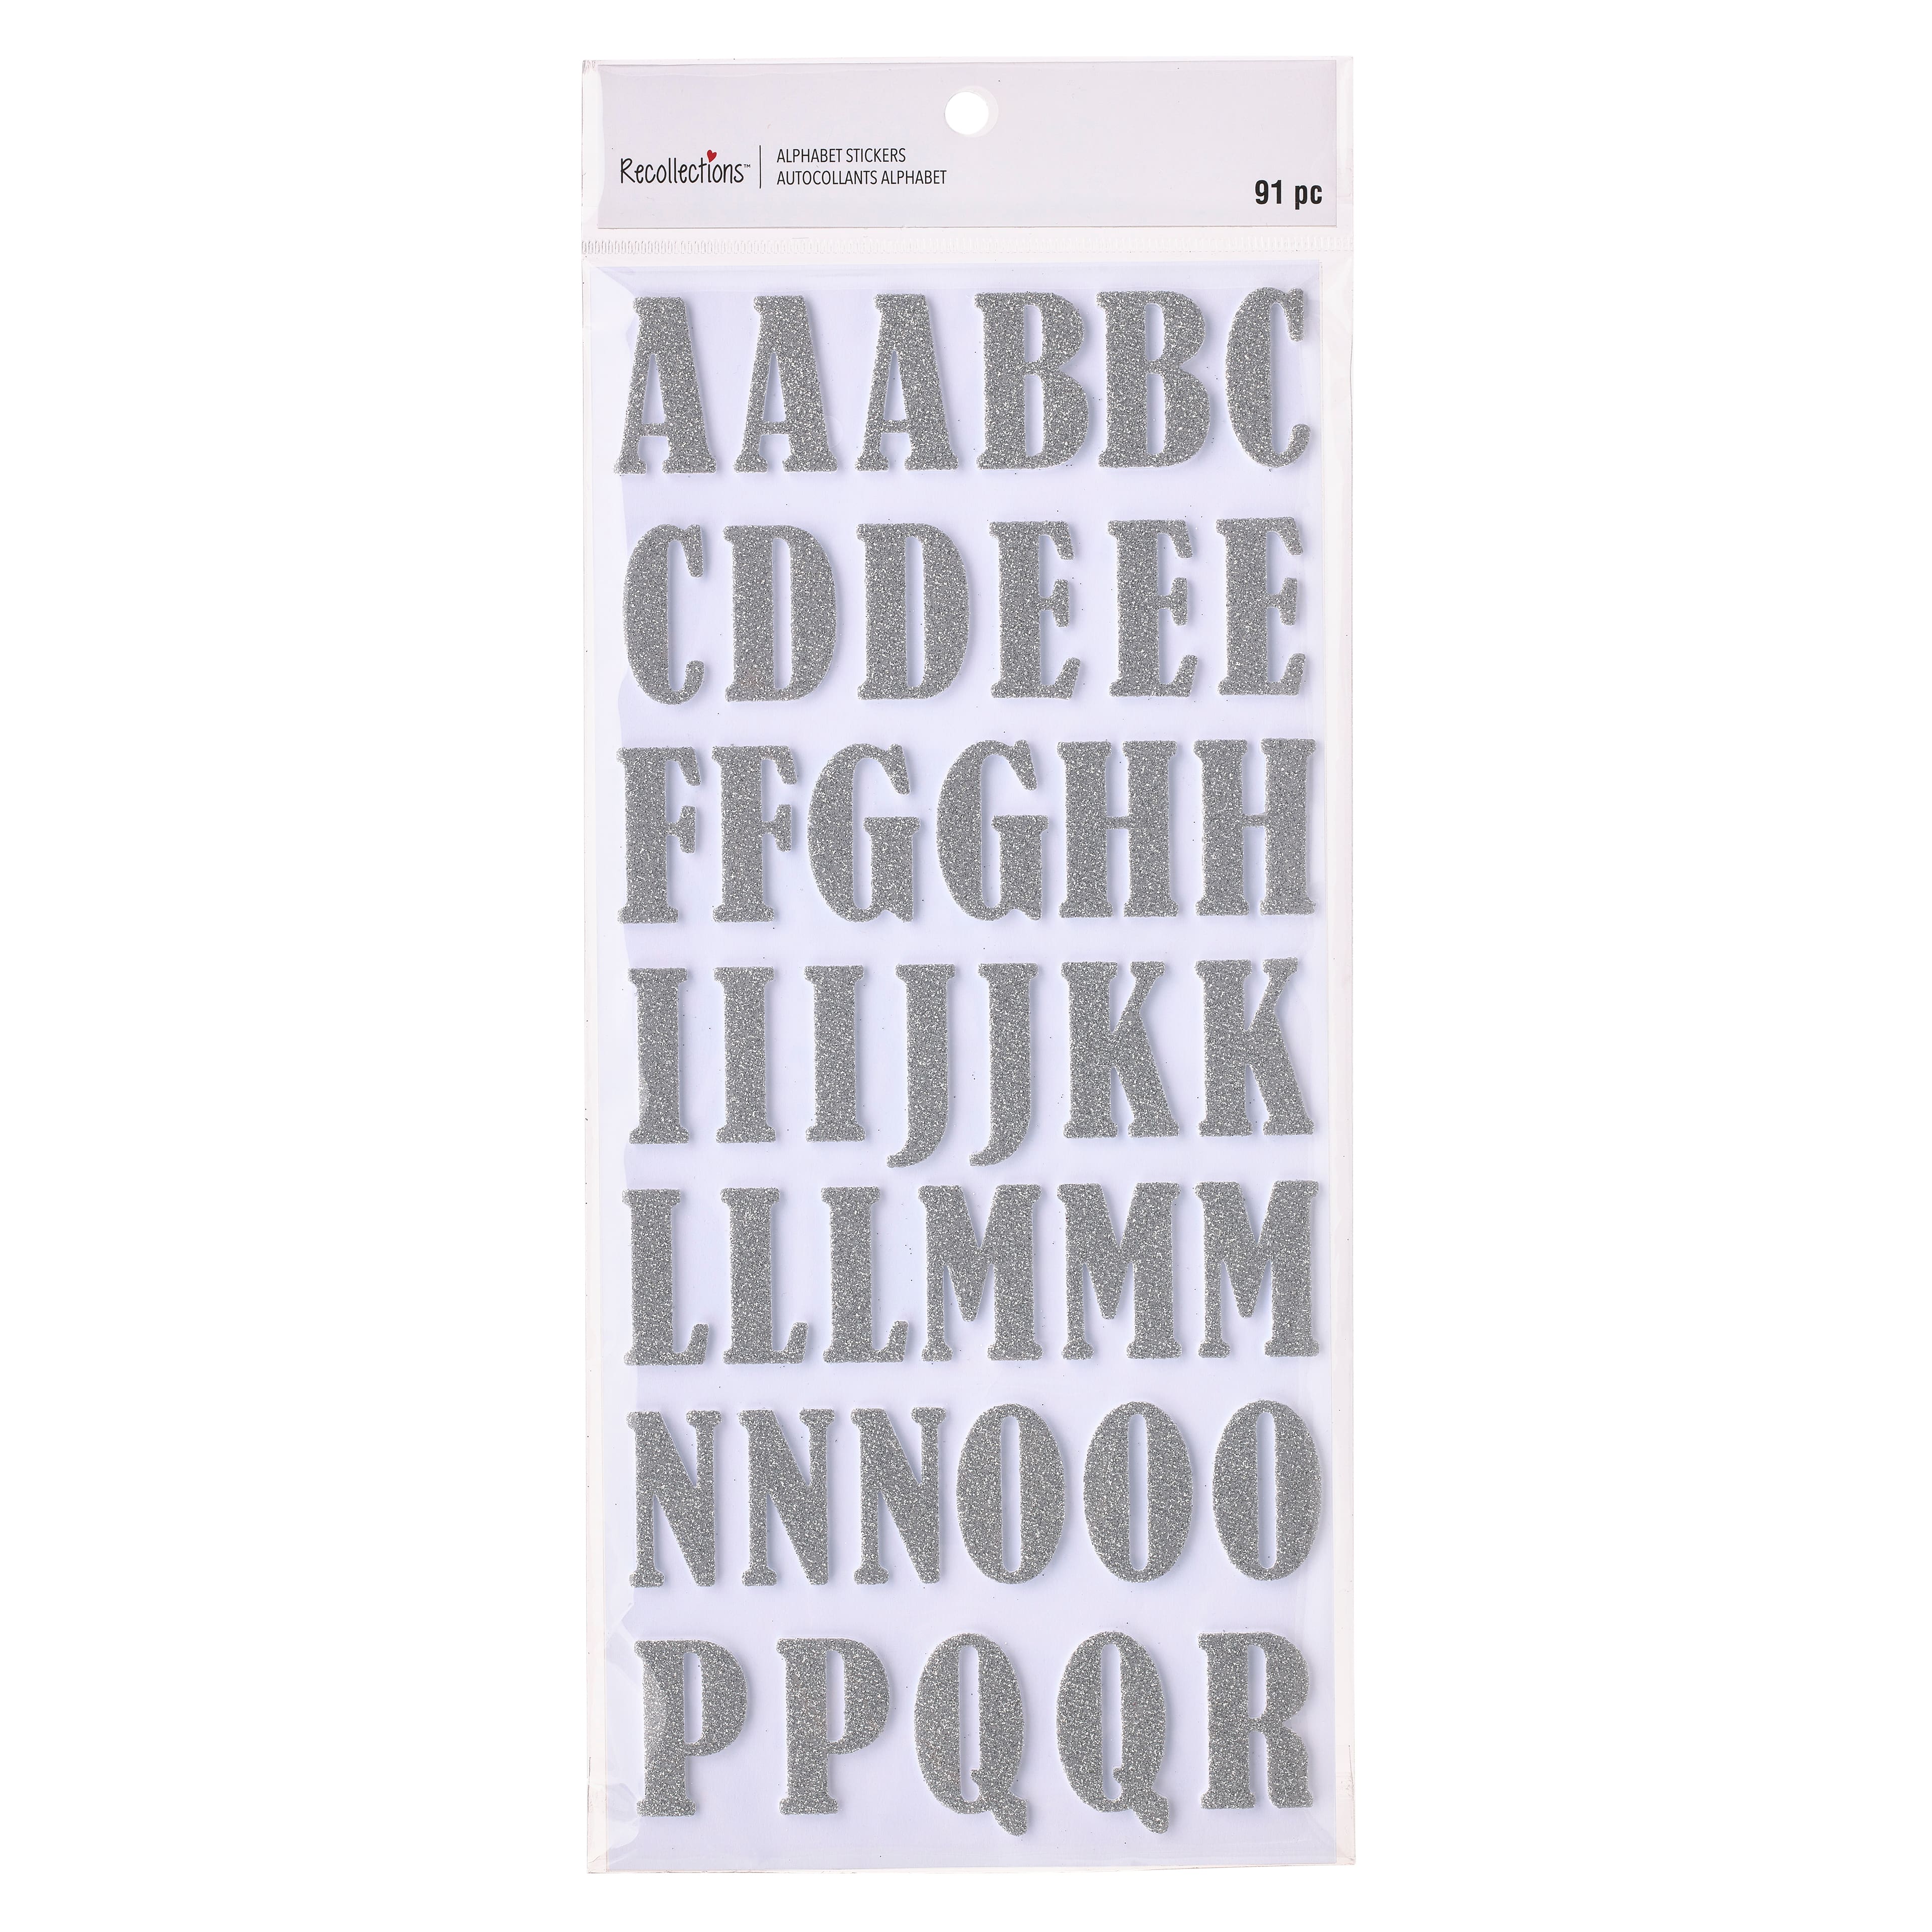 2 x Set of Full Alphabet Silver Letters - Removable Self Adhesive  Waterproof Durable Vinyl Stickers - Cut to The Sticker Shape - Size 20mm